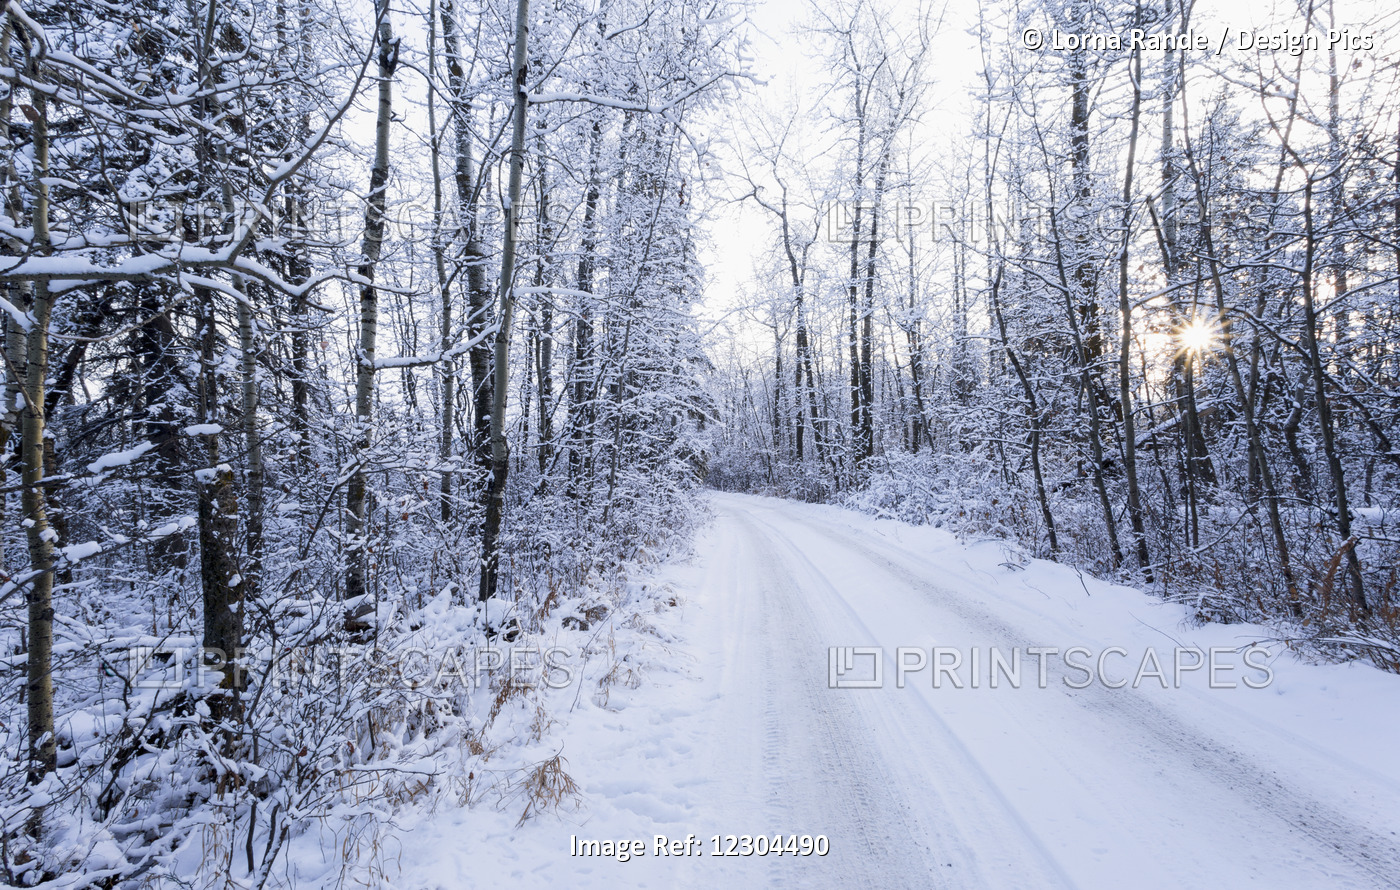 A Snow Covered Road With Tire Tracks And A Sunburst Through The Trees; ...